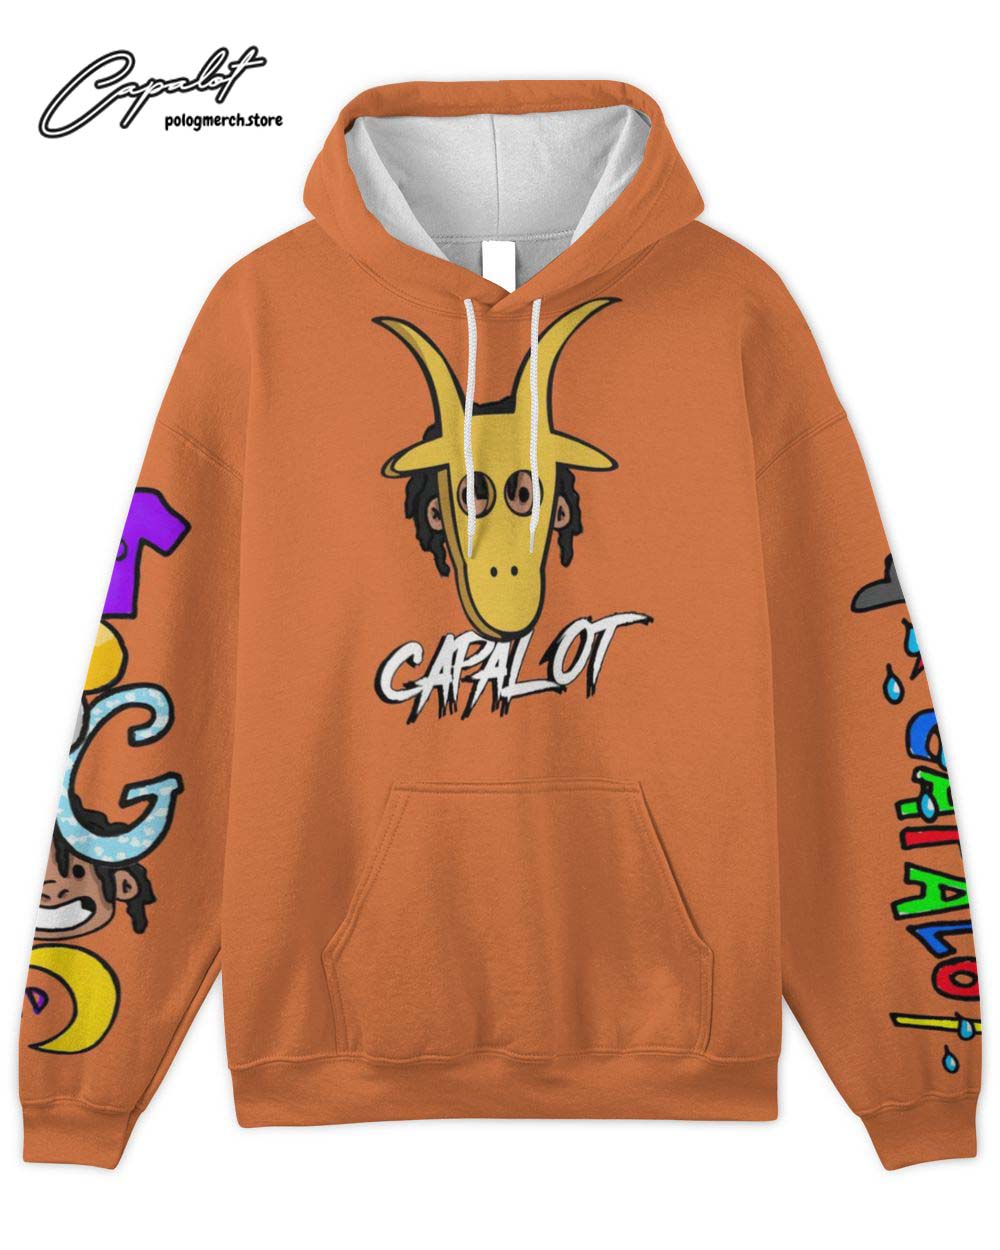 Merch The Goat Crewneck worn by Polo G on his Instagram account